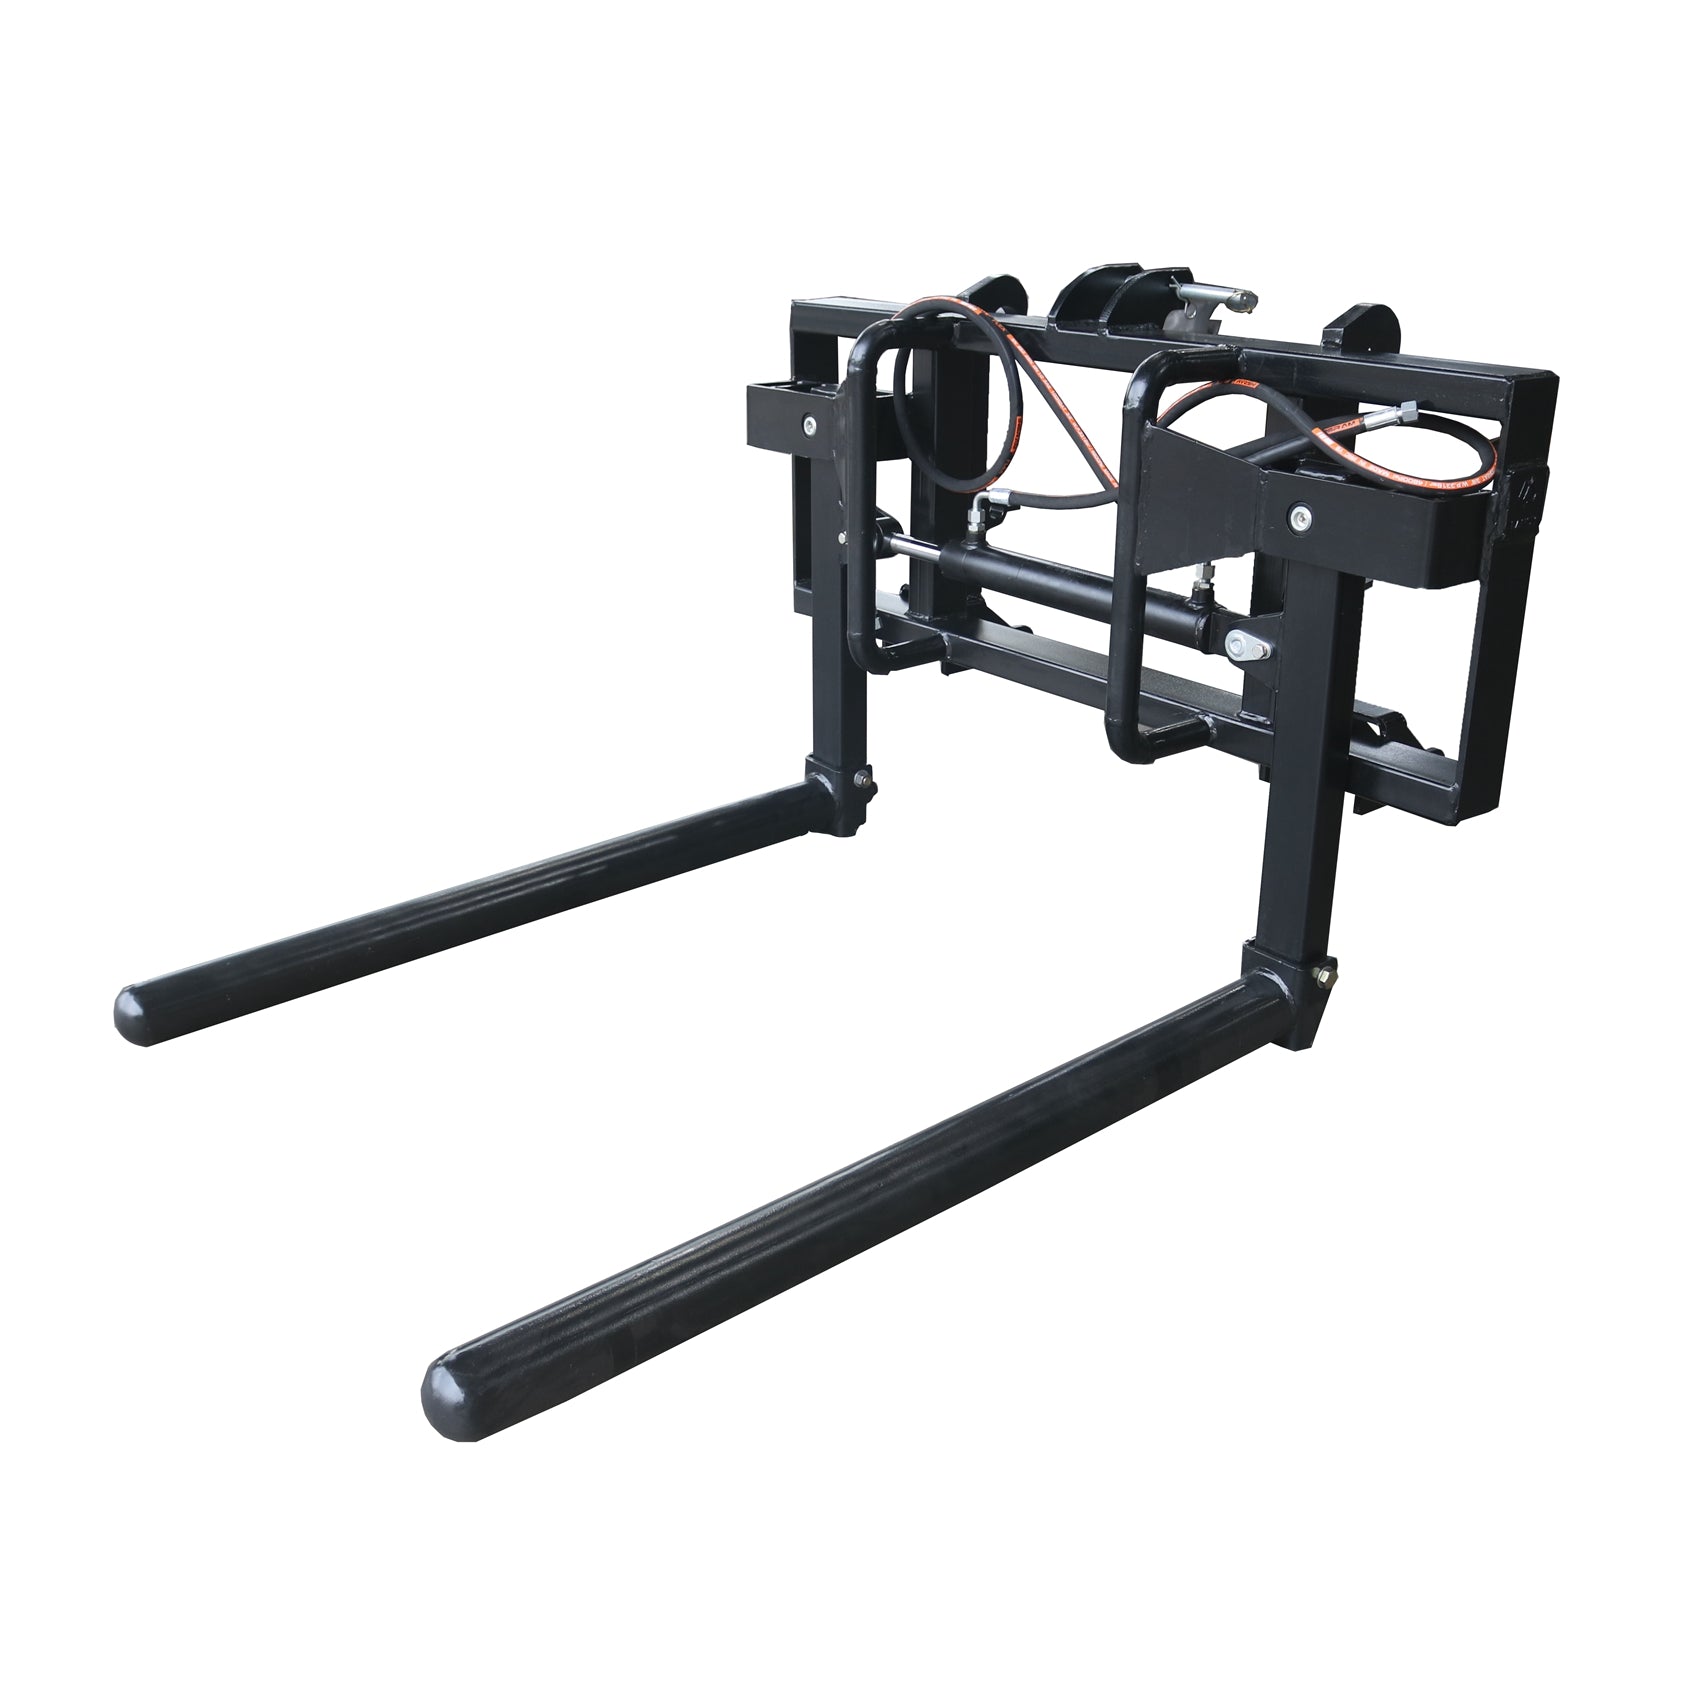 Landy Attachments Hydraulic Single Round or Square Bale Lifter/Handler SMS Brackets, Heavy Duty Bale Squeezer Bale Handler